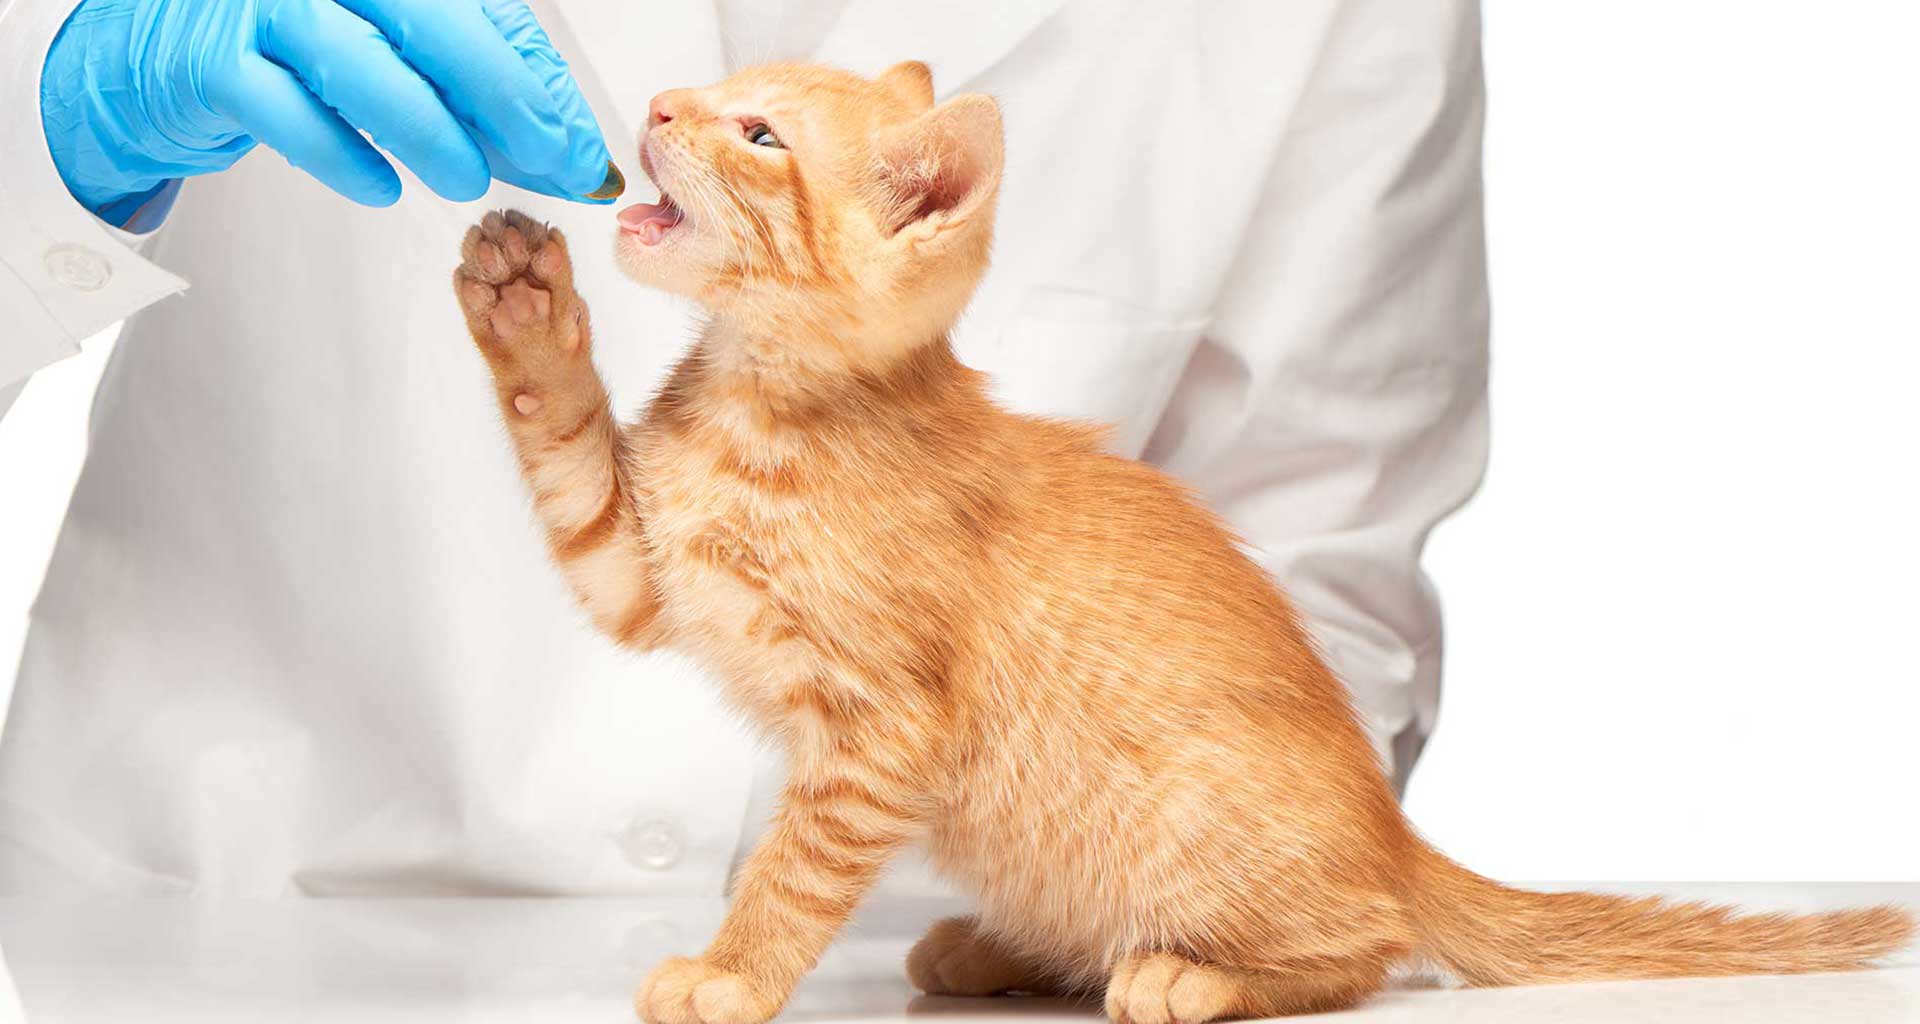 What is the point of a blood test for your pets?